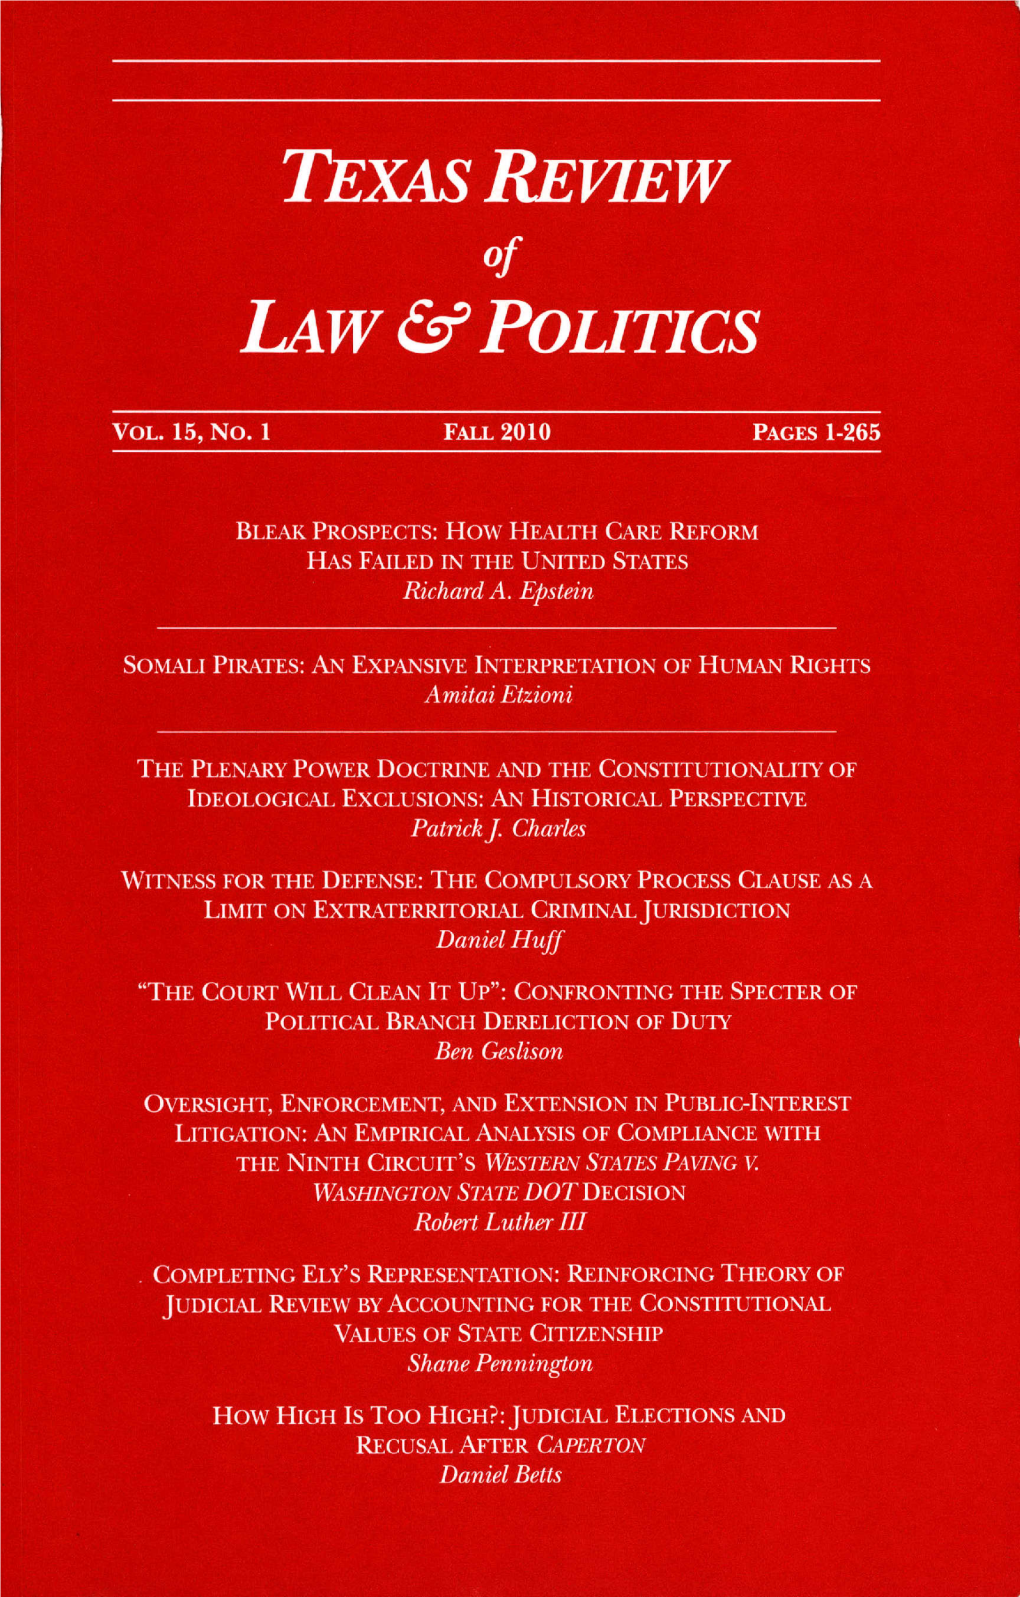 Law & Politics Is Published Twice Yearly, Fall and Spring